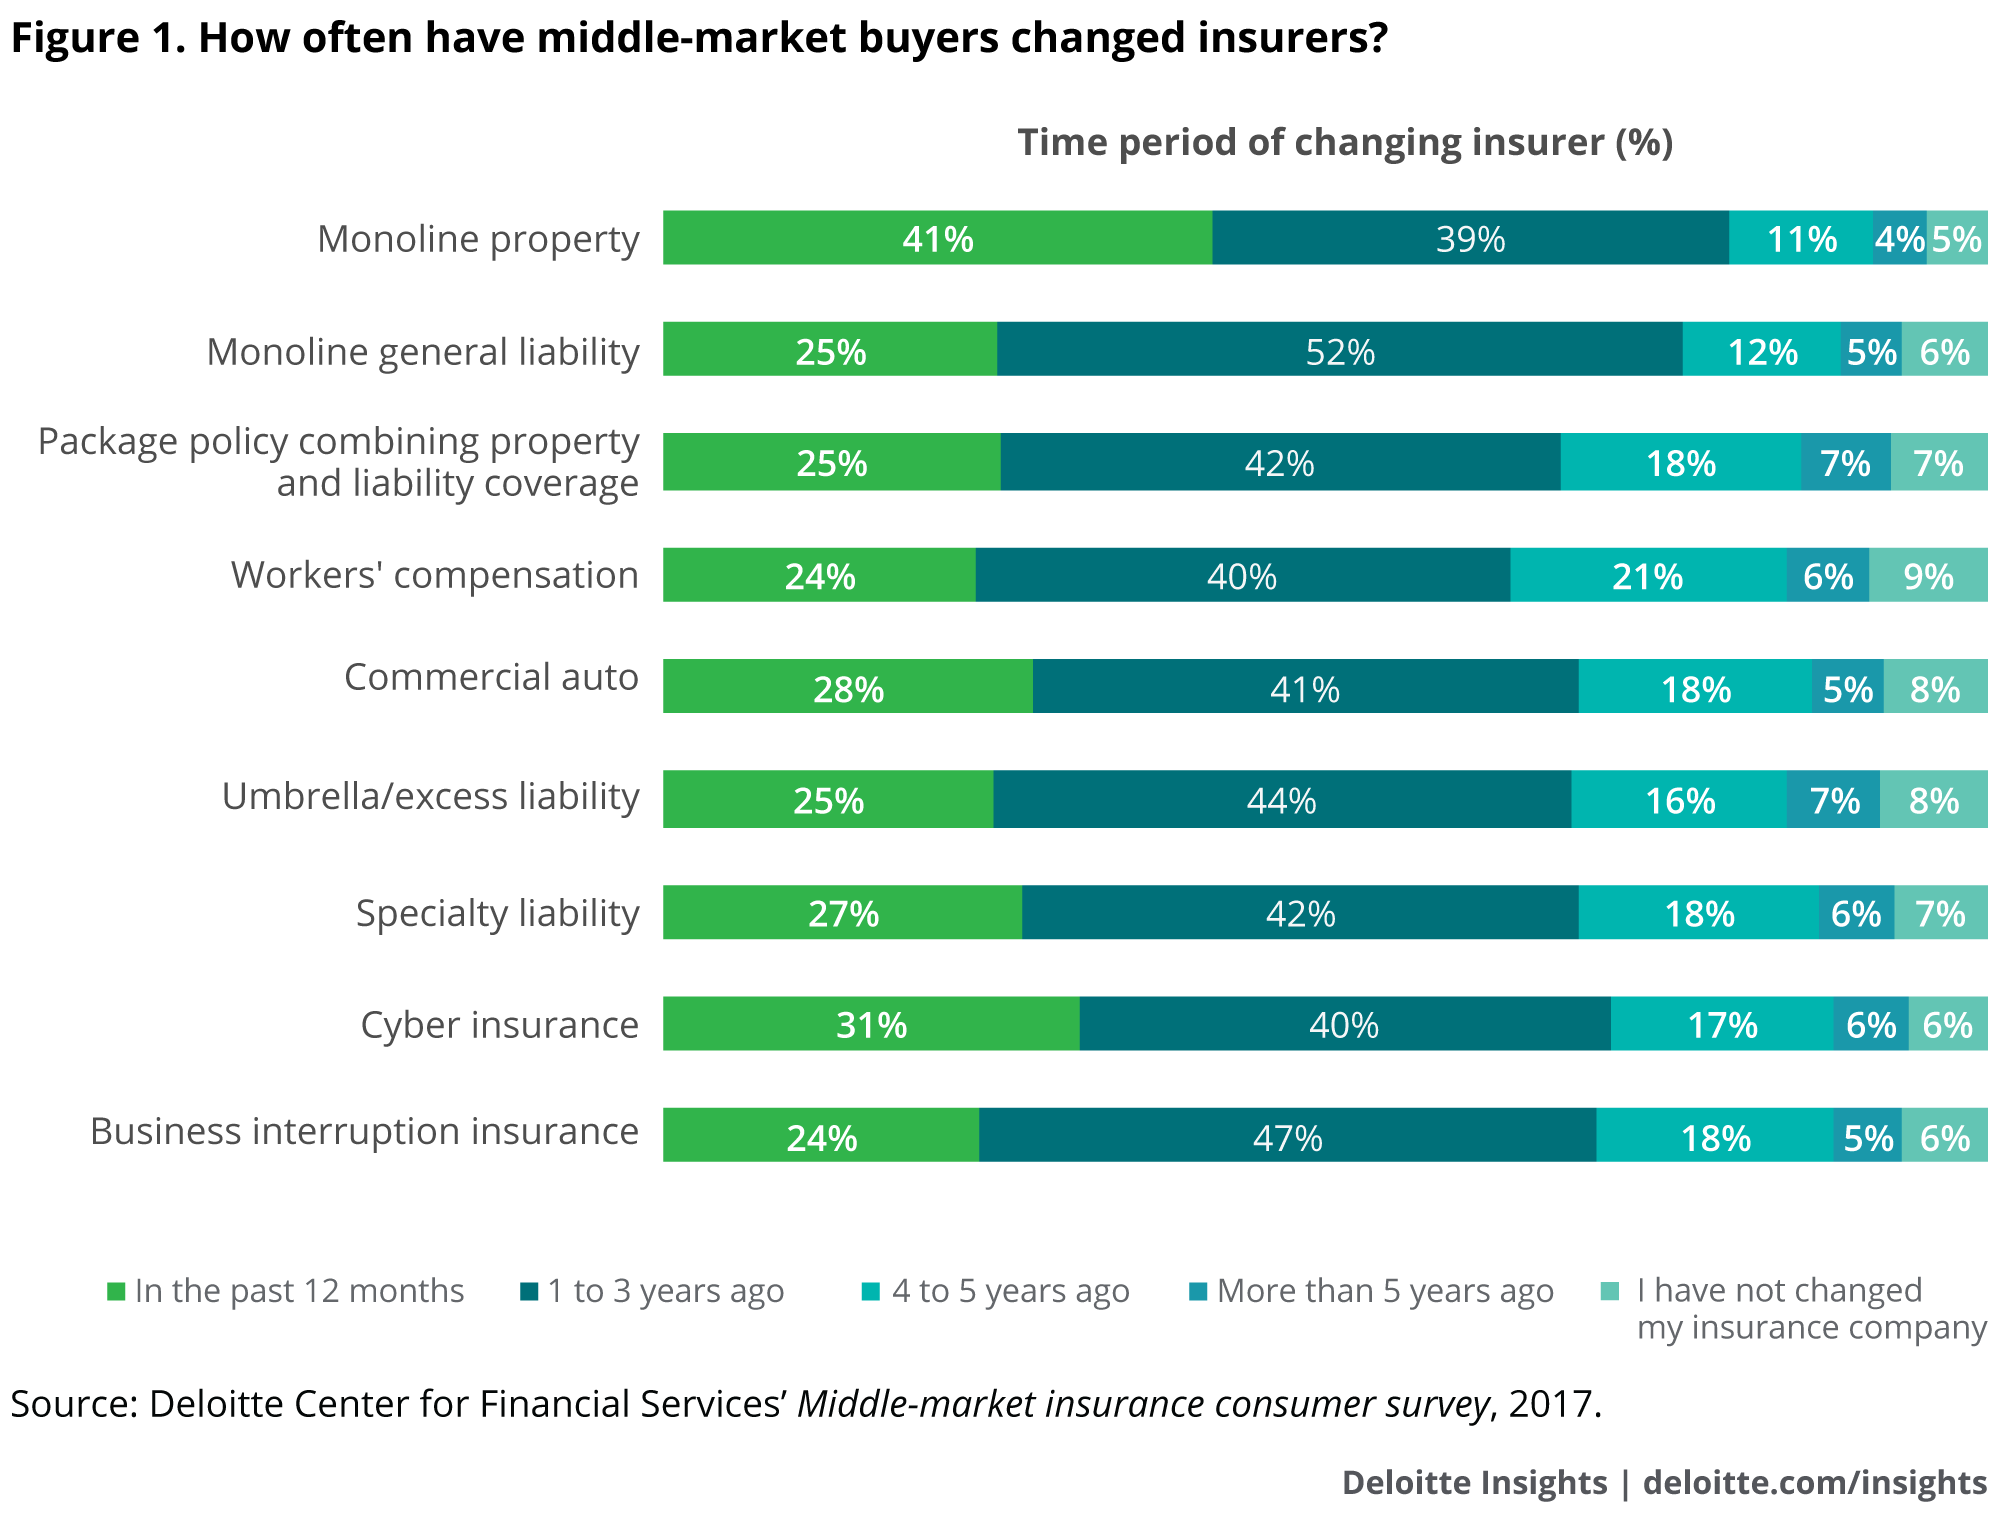 How often have middle-market buyers change insurers?